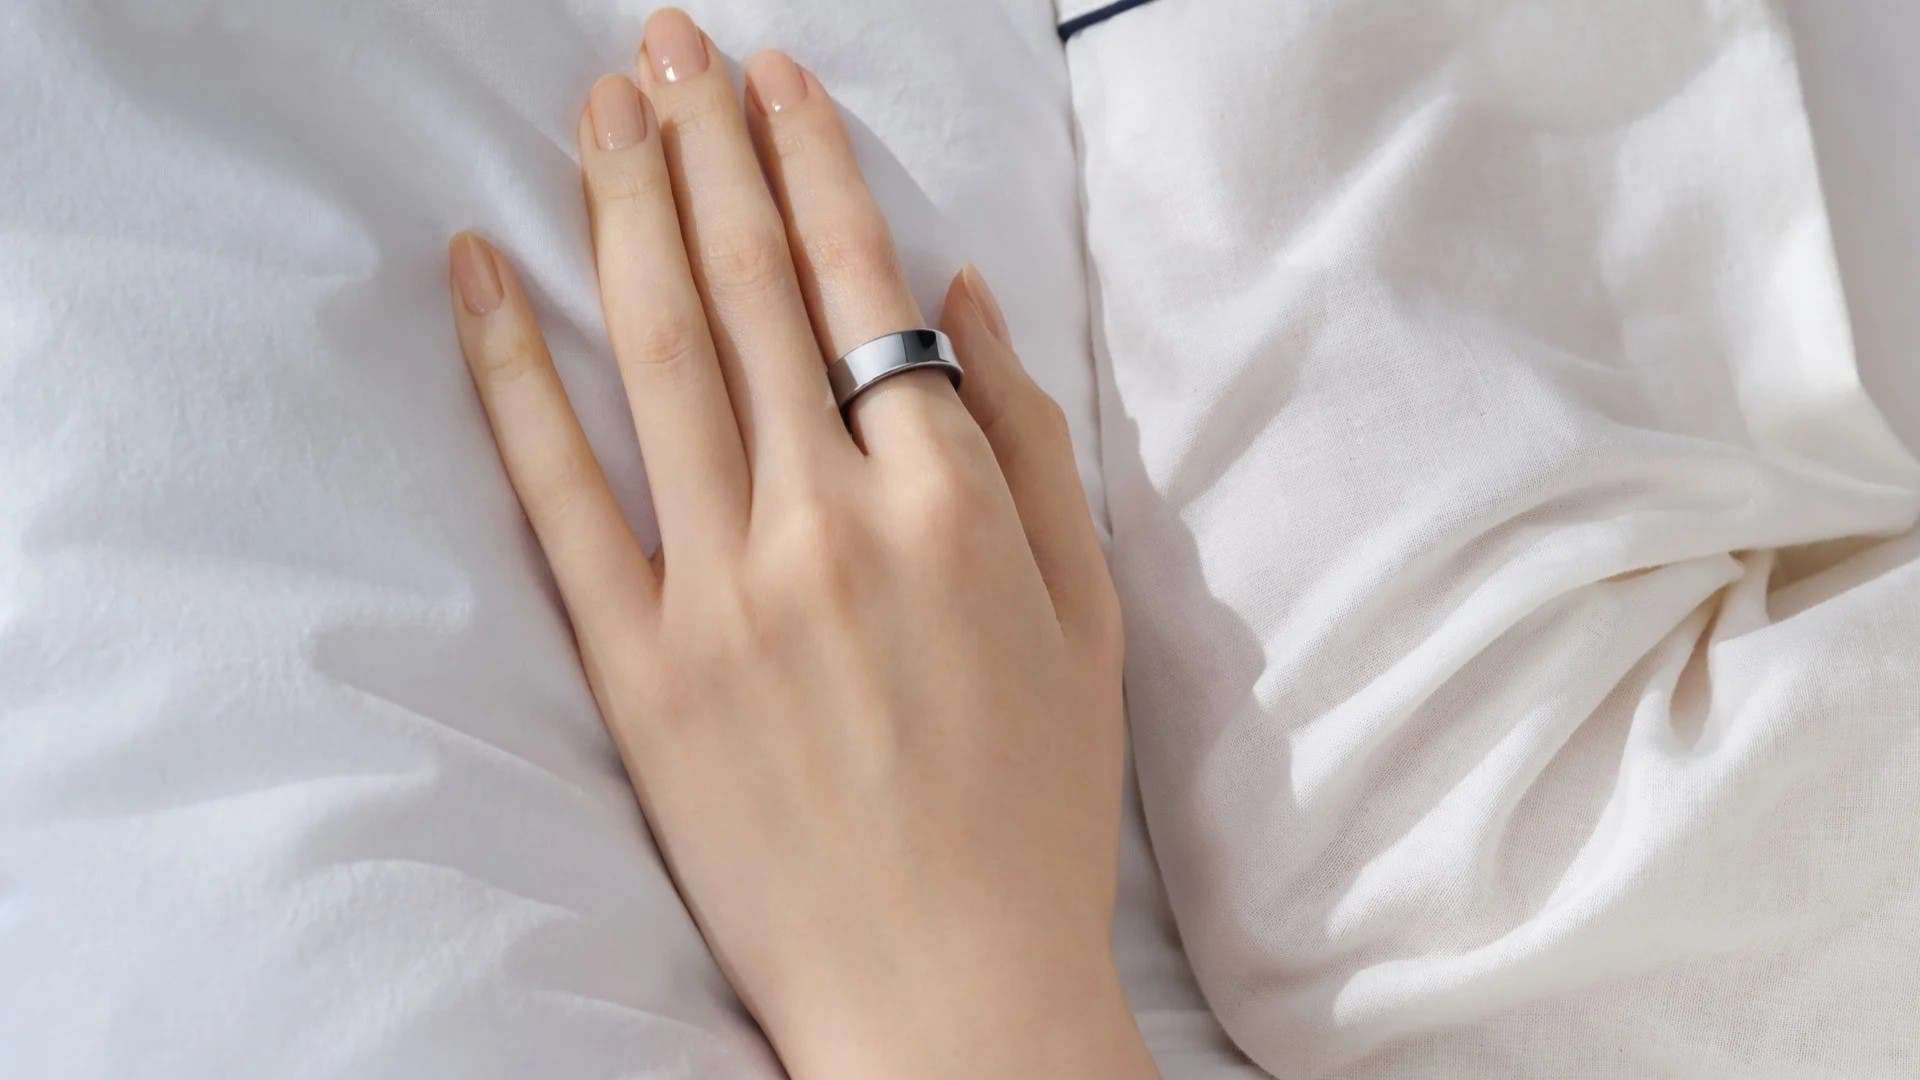 Samsung Galaxy Ring: The Future of Wearable Health Tracking